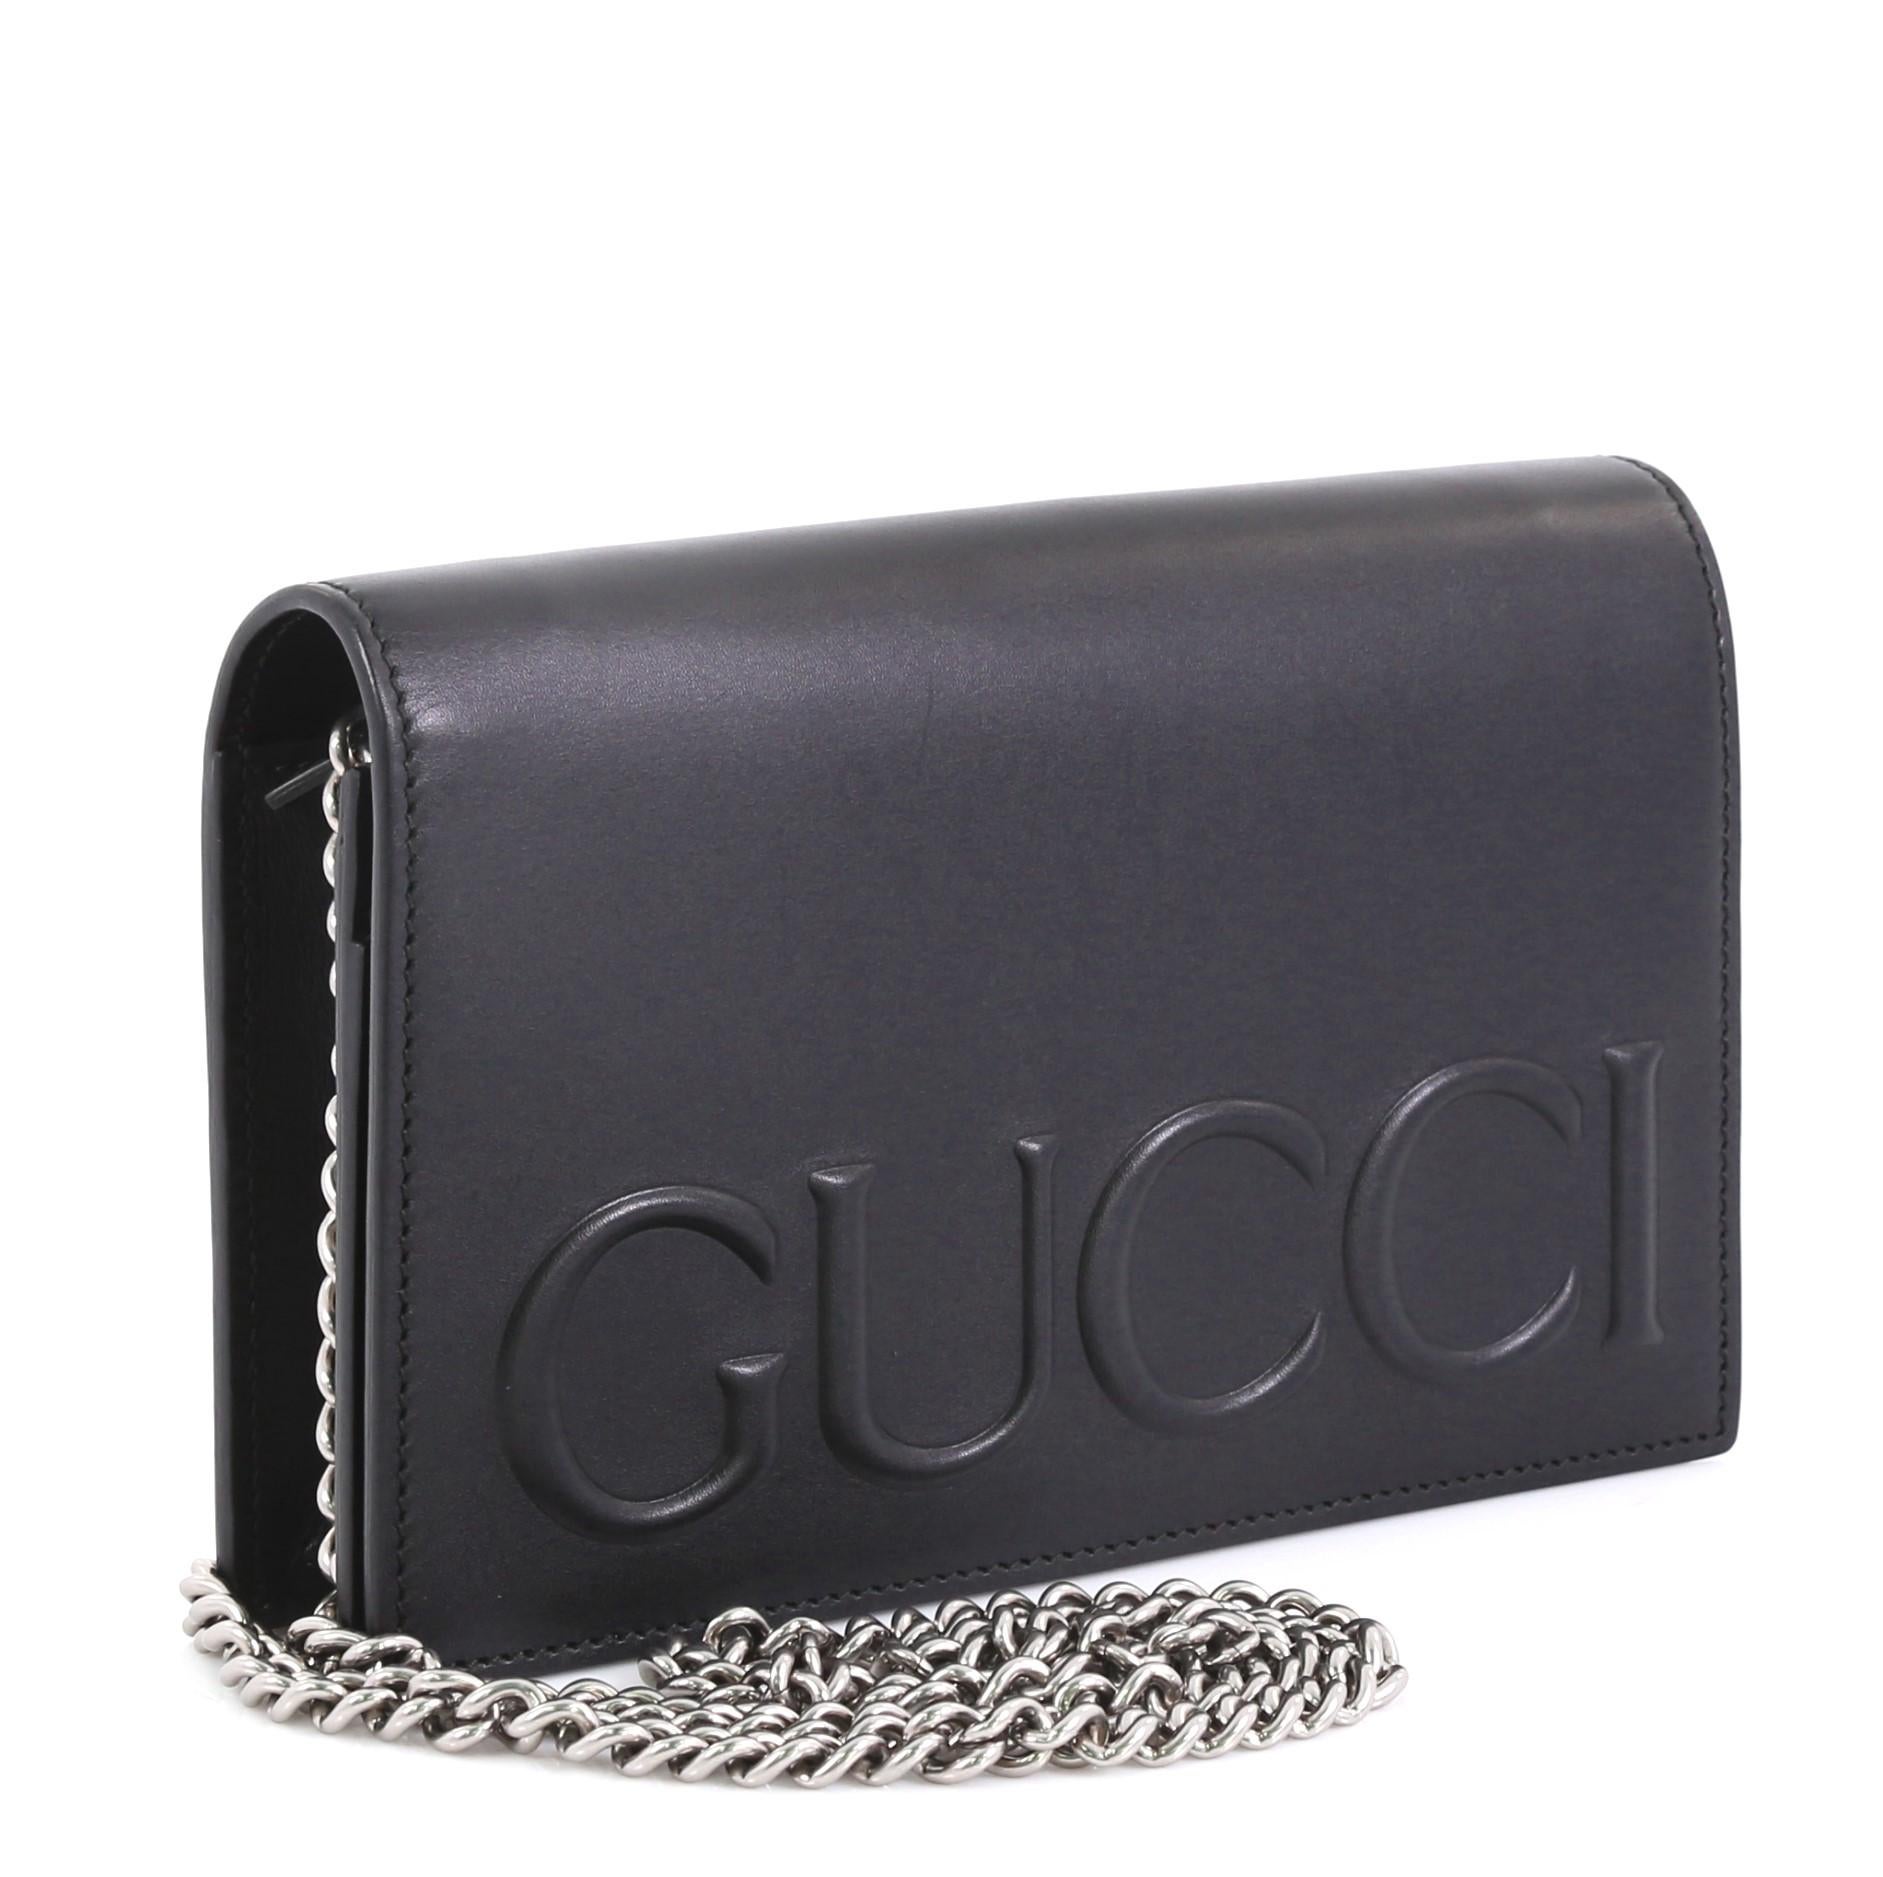 This Gucci XL Chain Shoulder Bag Leather Mini, crafted in smooth black leather, features an embossed Gucci logo, detachable chain-link strap and aged silver-tone hardware. Its button snap closure opens to a black leather interior with slip and zip